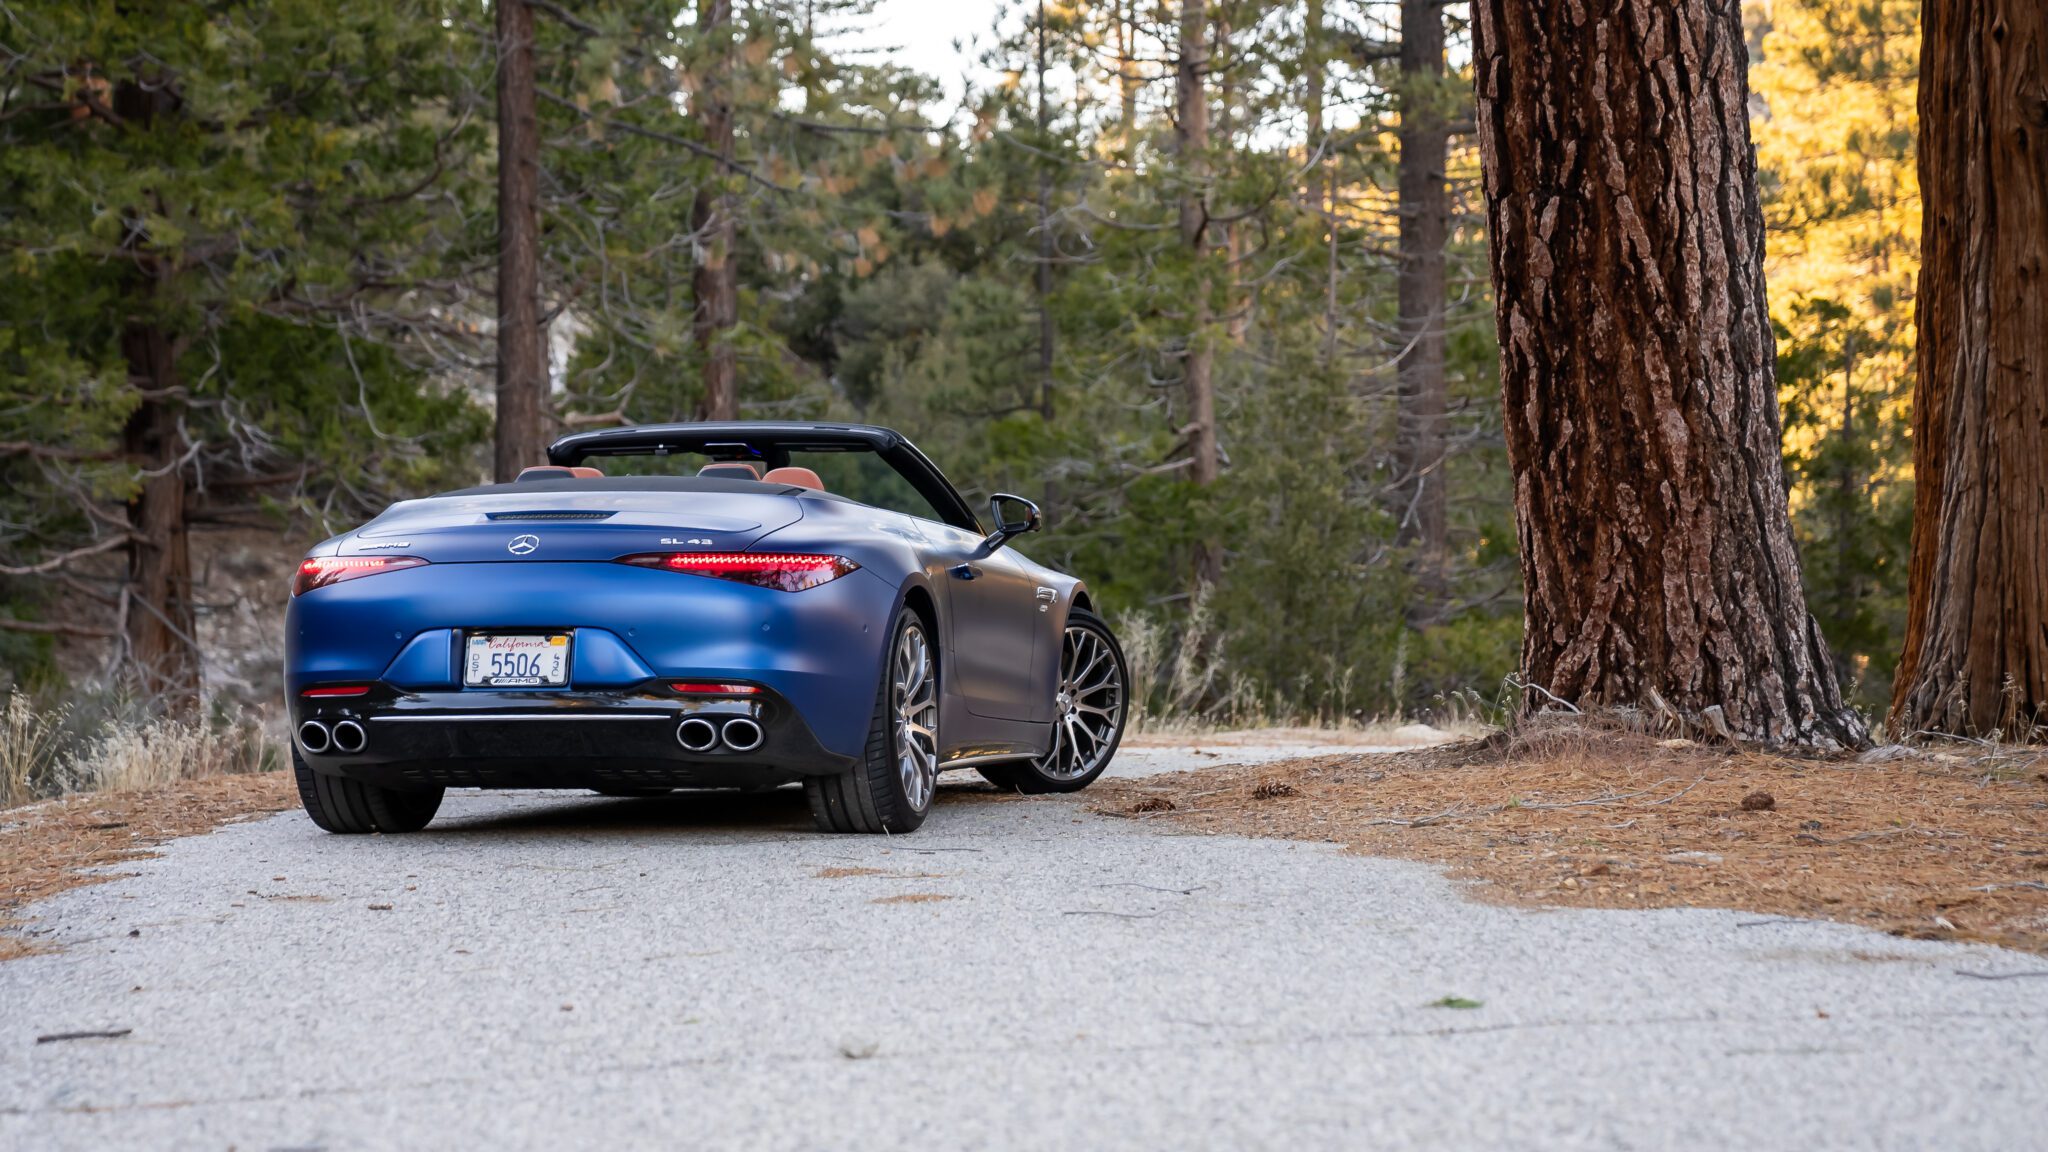 An image of a blue Mercedes-AMG SL 43 parked outdoors.